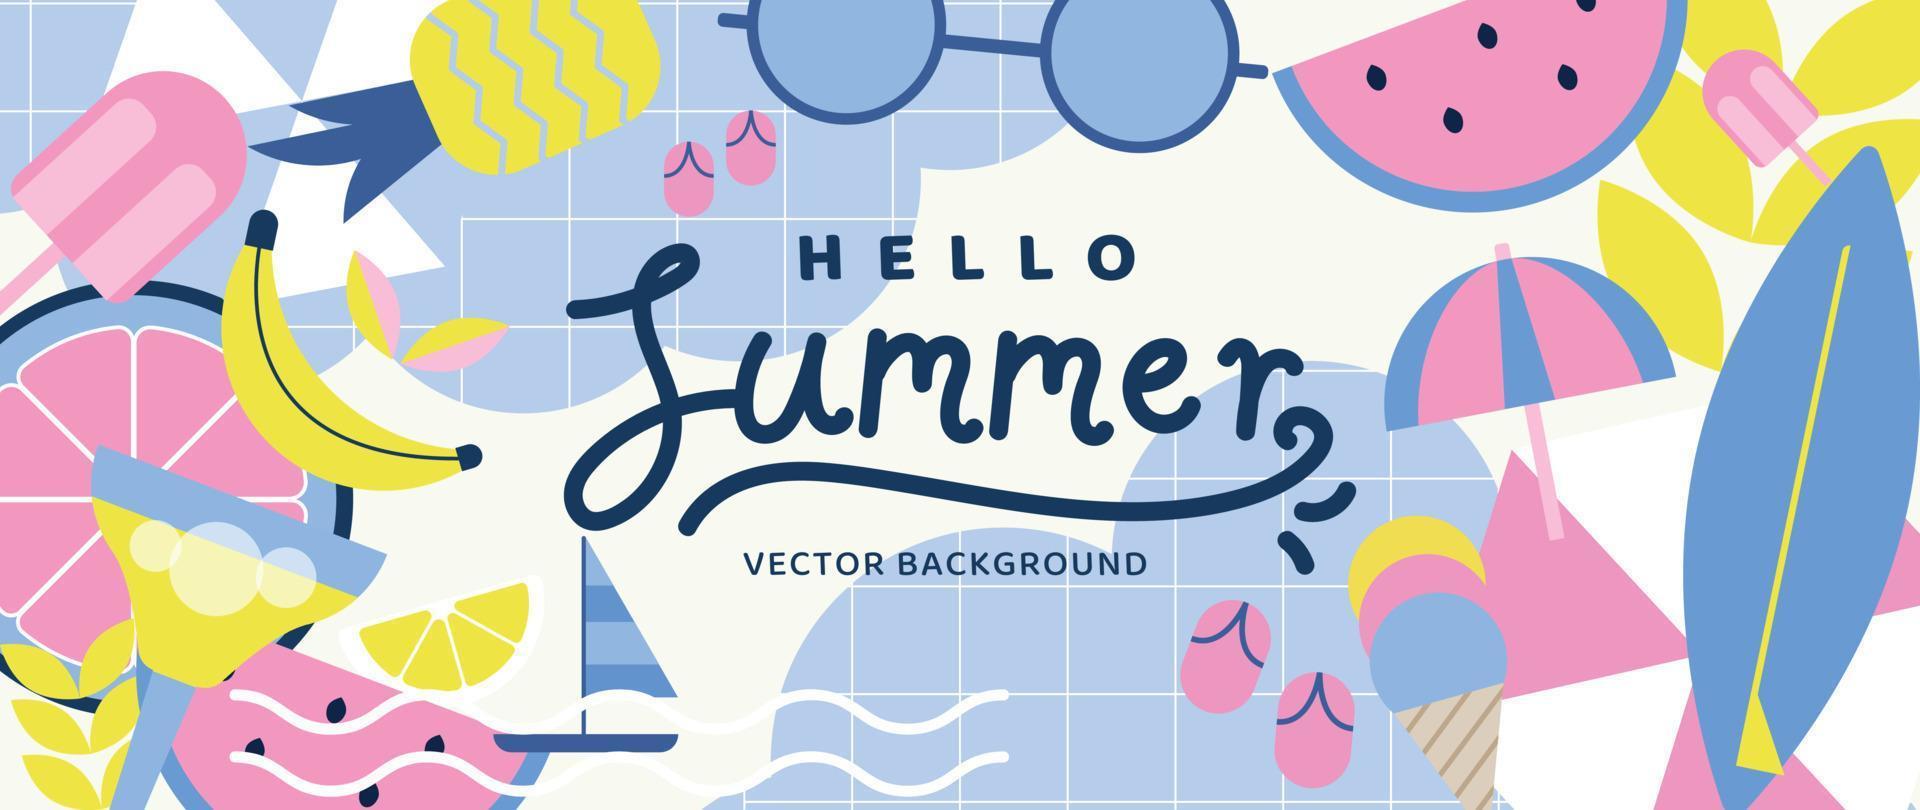 Summer geometric background vector. Colorful abstract wallpaper with simple shapes, watermelon, lemon, ice-cream, sun glasses. Happy summertime symbol illustration design for poster, cover, banner. vector